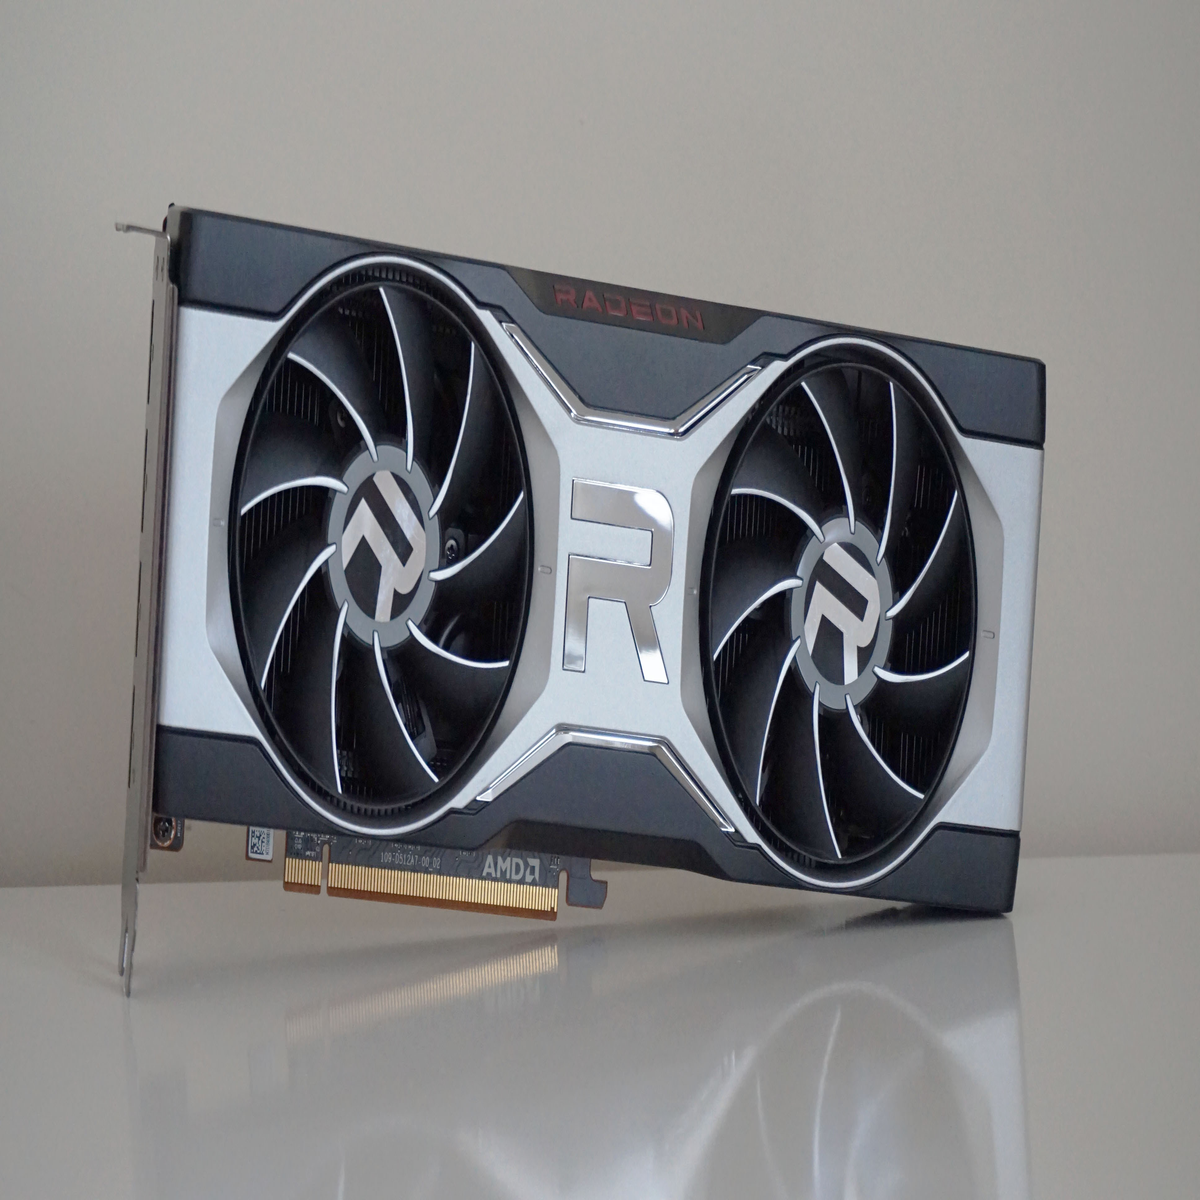 AMD Radeon RX 6700 XT In Stock Availability and Price Tracking